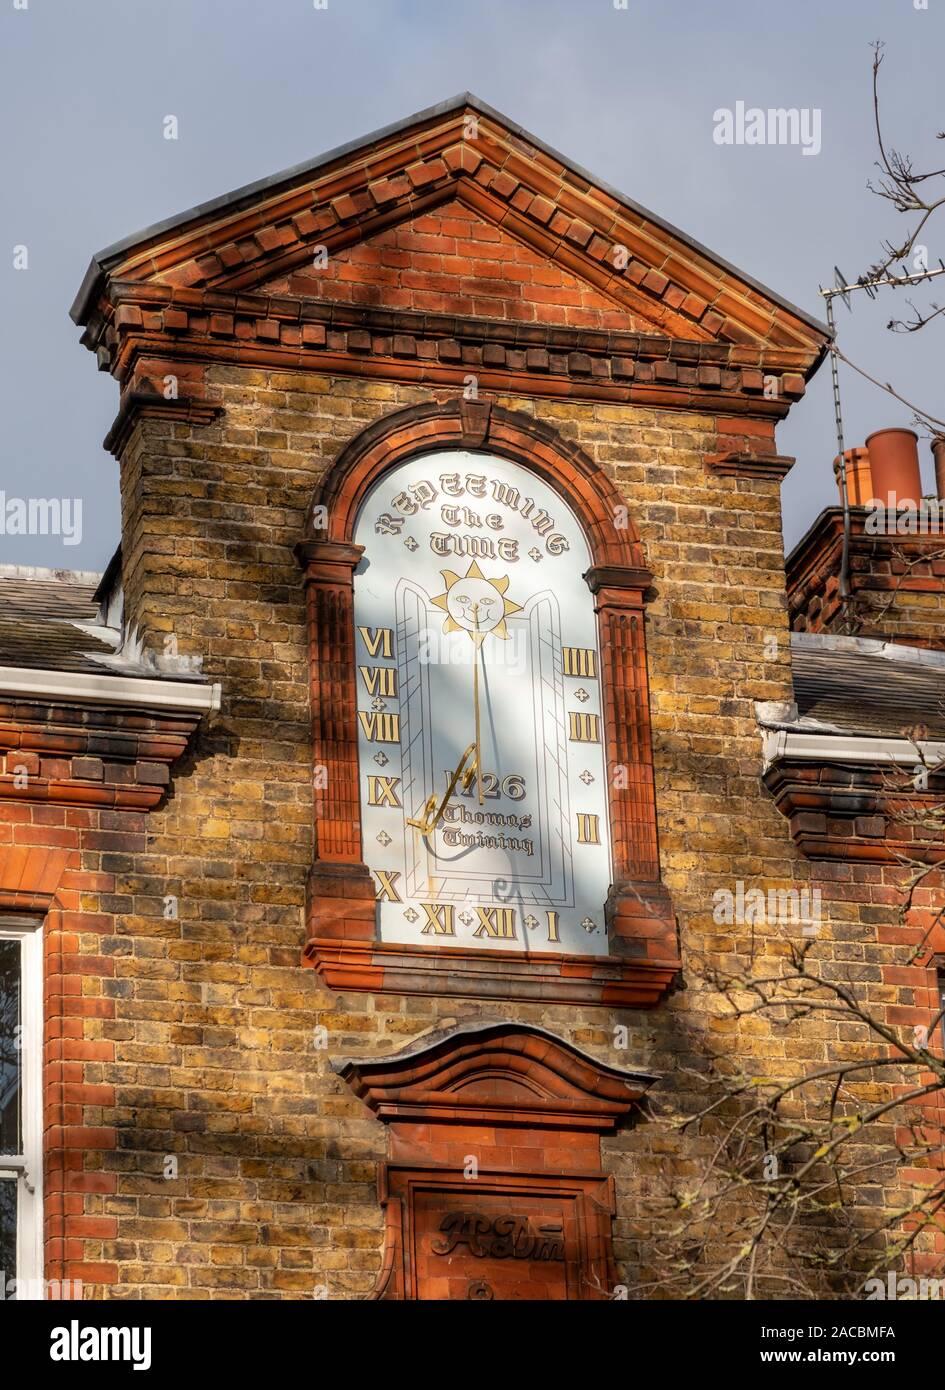 Painted sundial dated 1726 on front of Dial House, Riverside, Twickenham, west London. The property was once owned by Robert Twining of Twinings Tea. Stock Photo